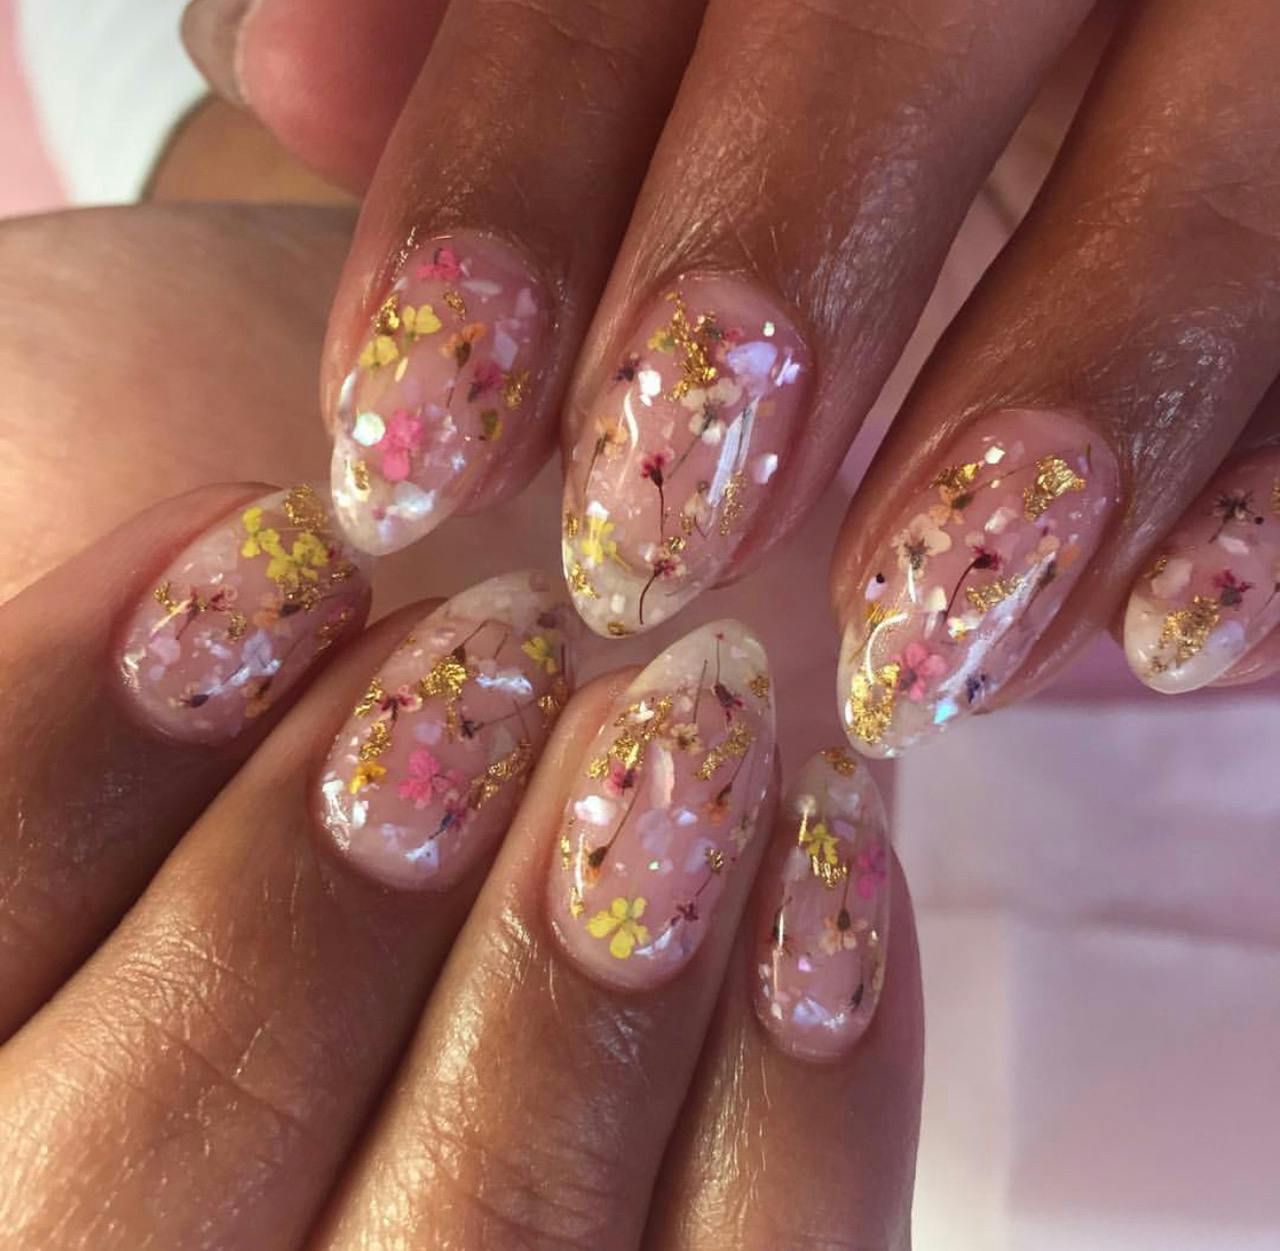 Dried Flowers for Nails - Etsy